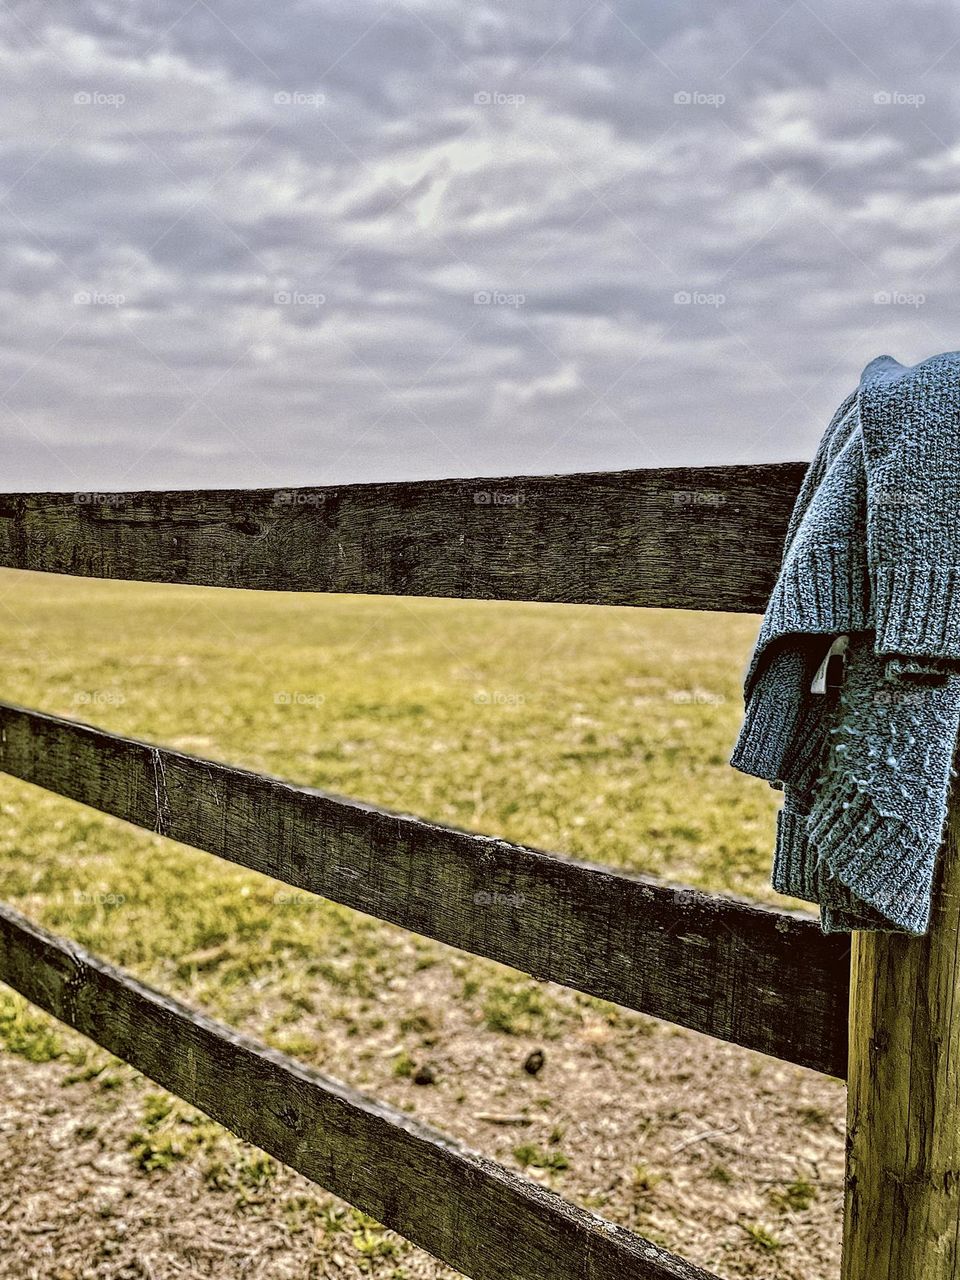 Sweater hangs on a fence post in the countryside, vacationing at a working horse farm, vacationing on the countryside, forgotten sweater in the fence, the little things in the farm